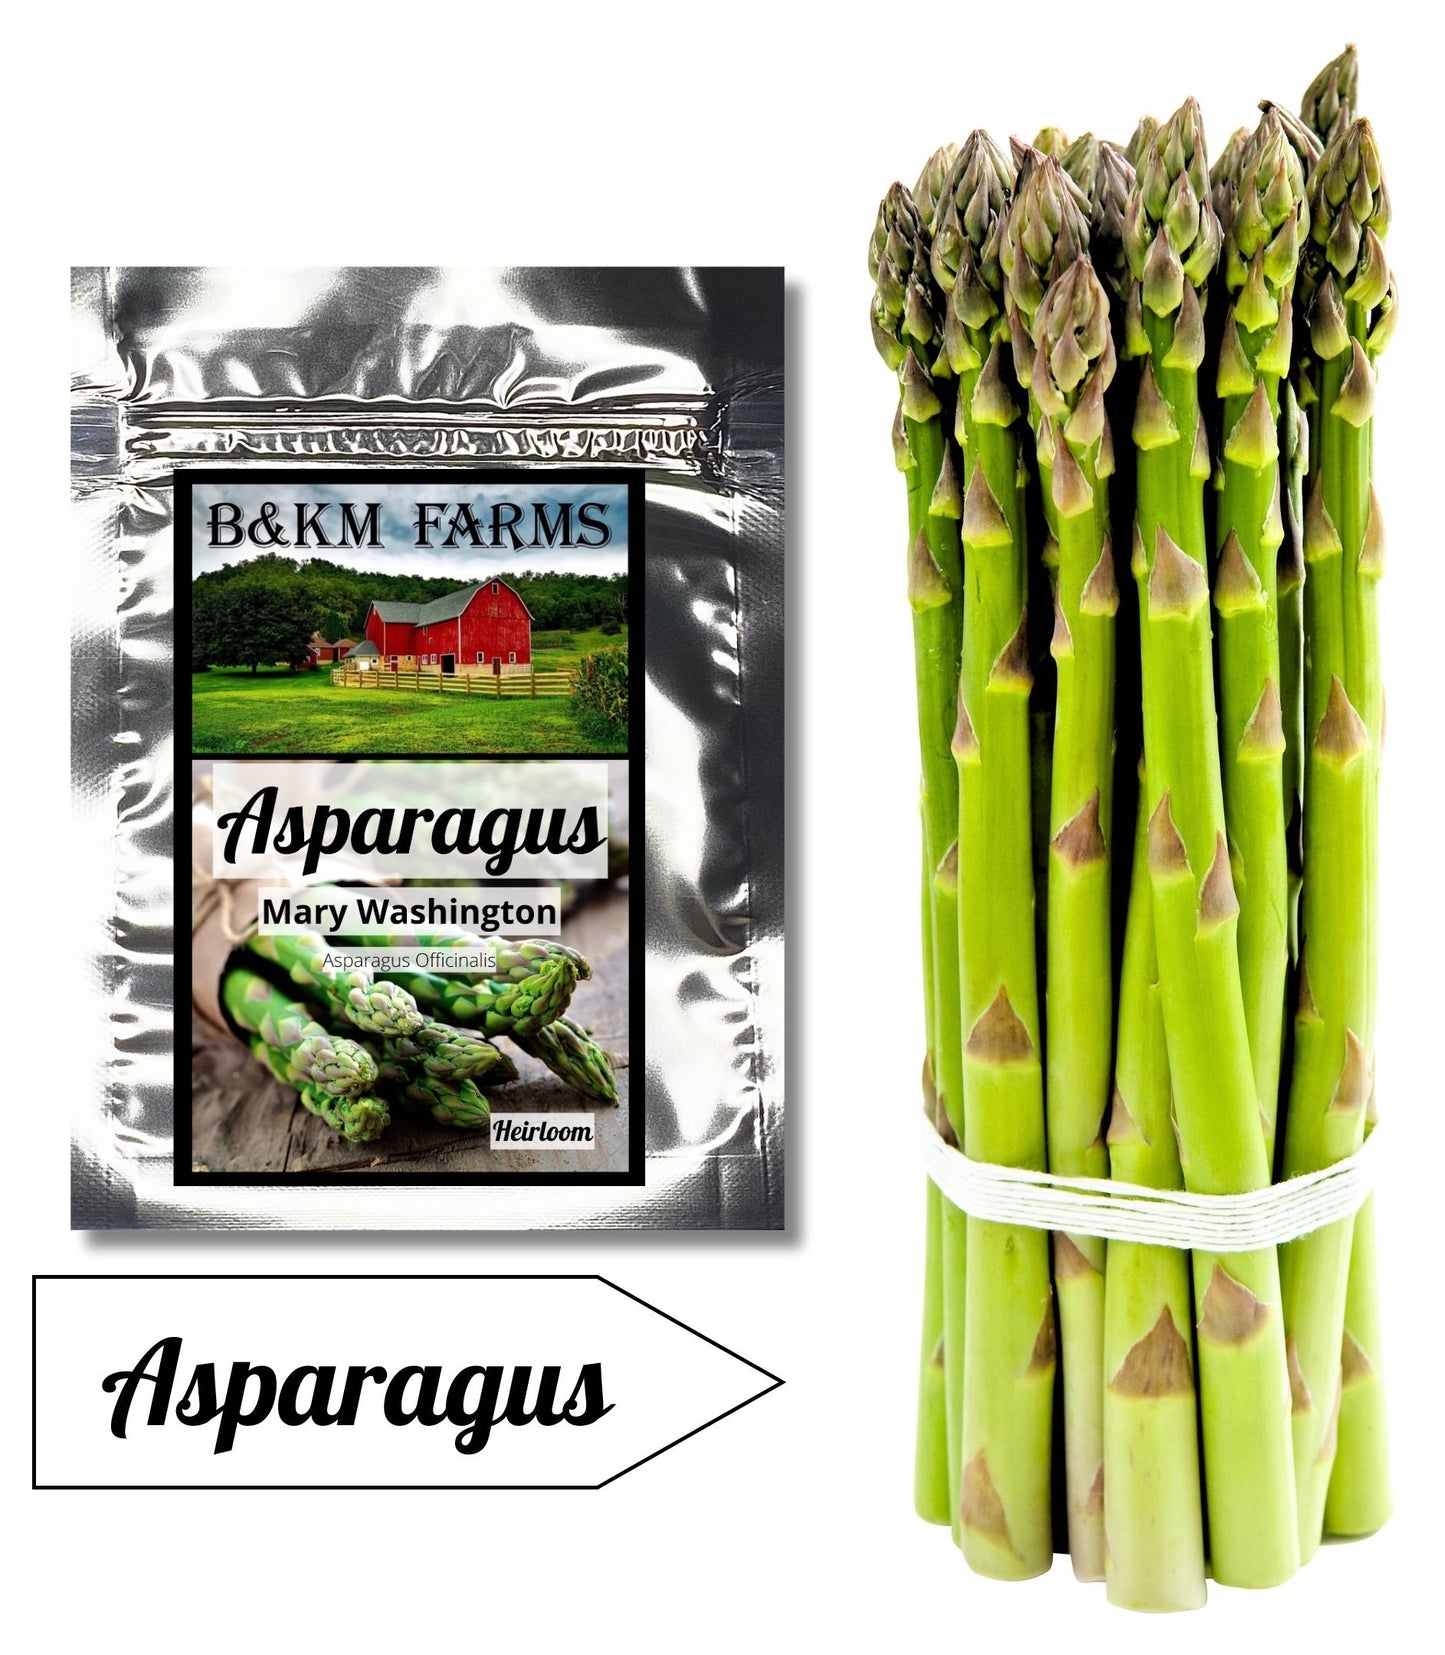 Asparagus Mary Washington: Crown Jewels of Your Garden